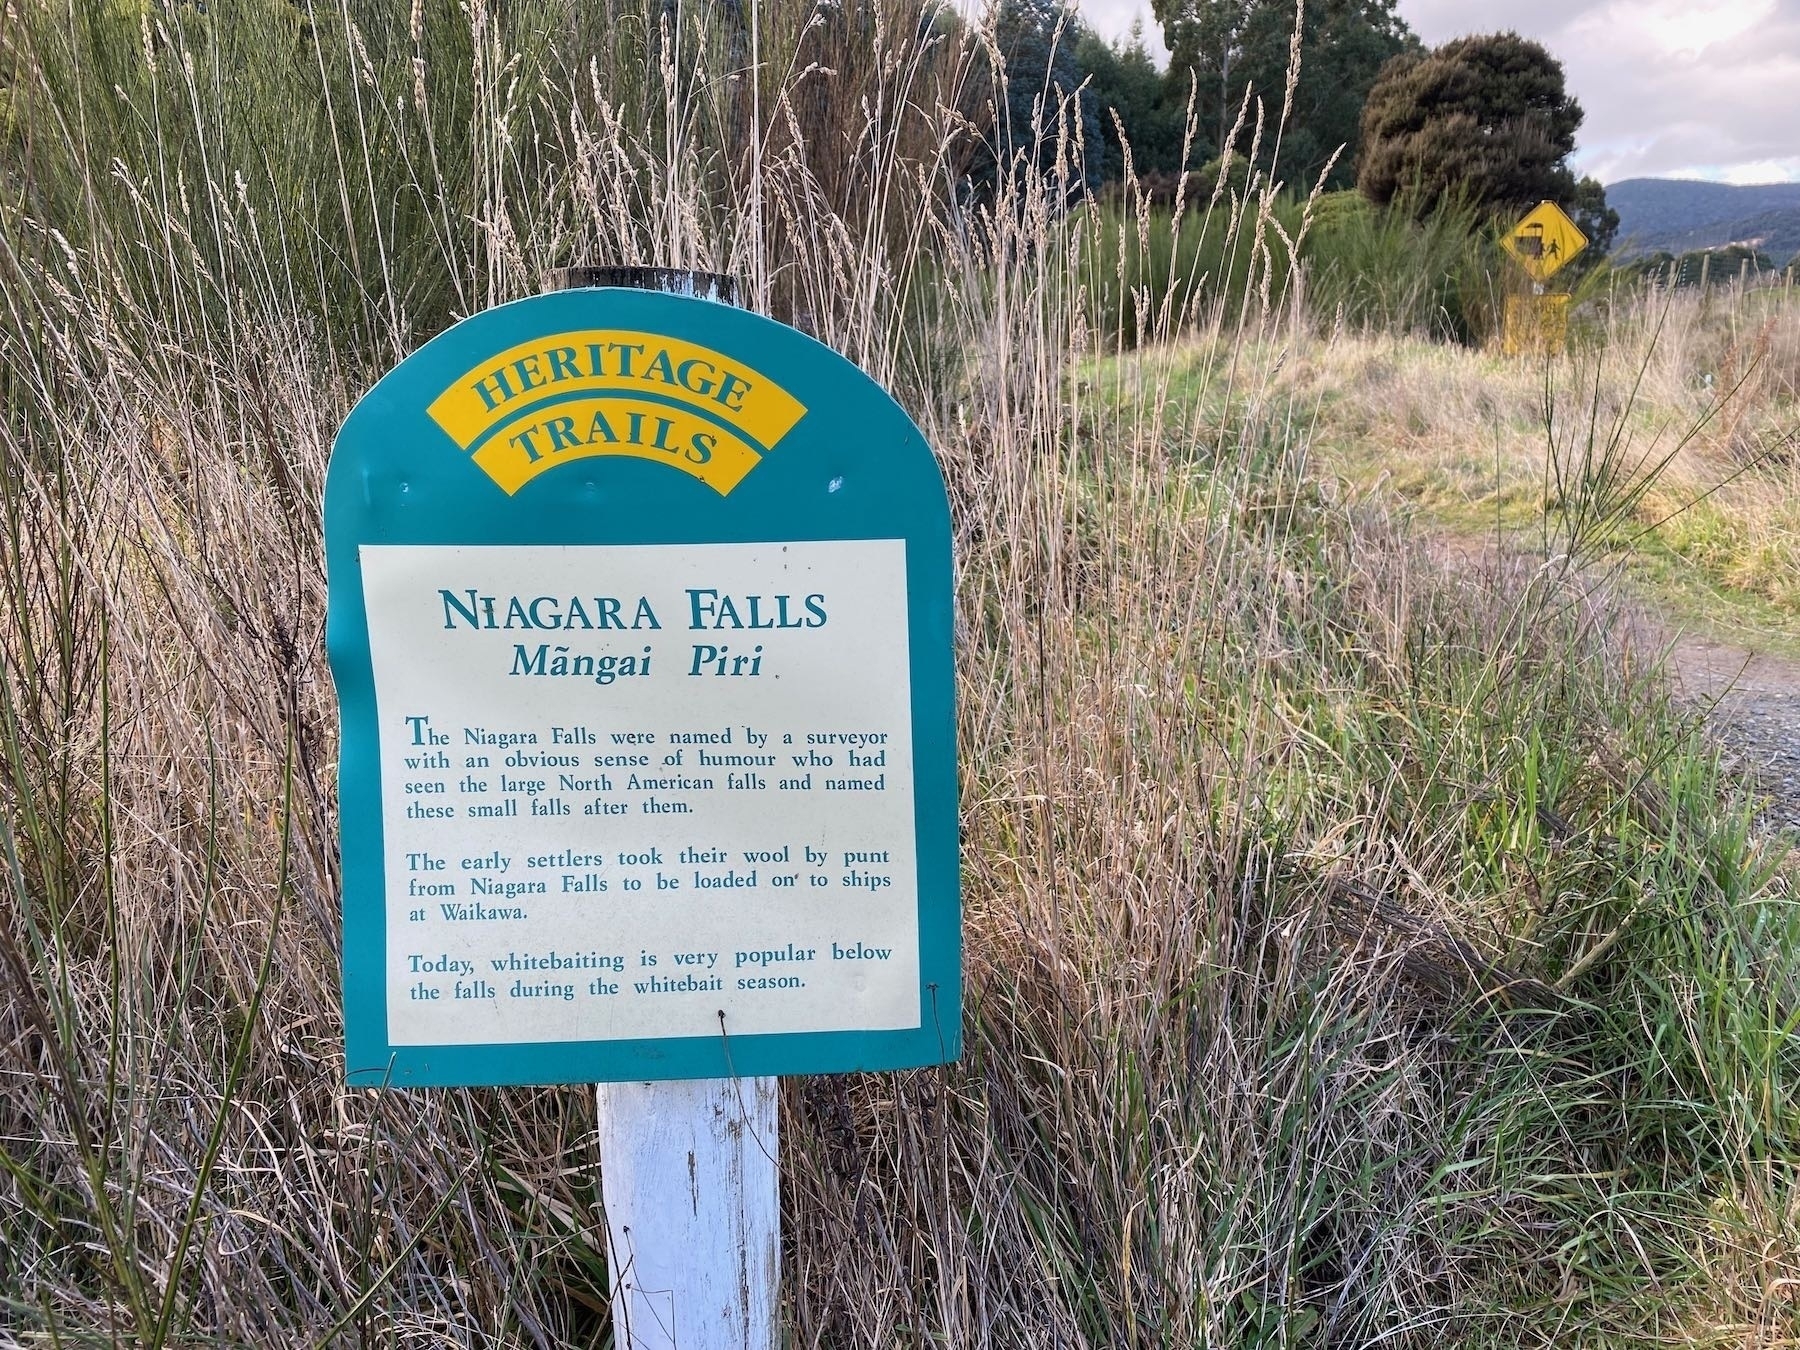 Trail info sign. 